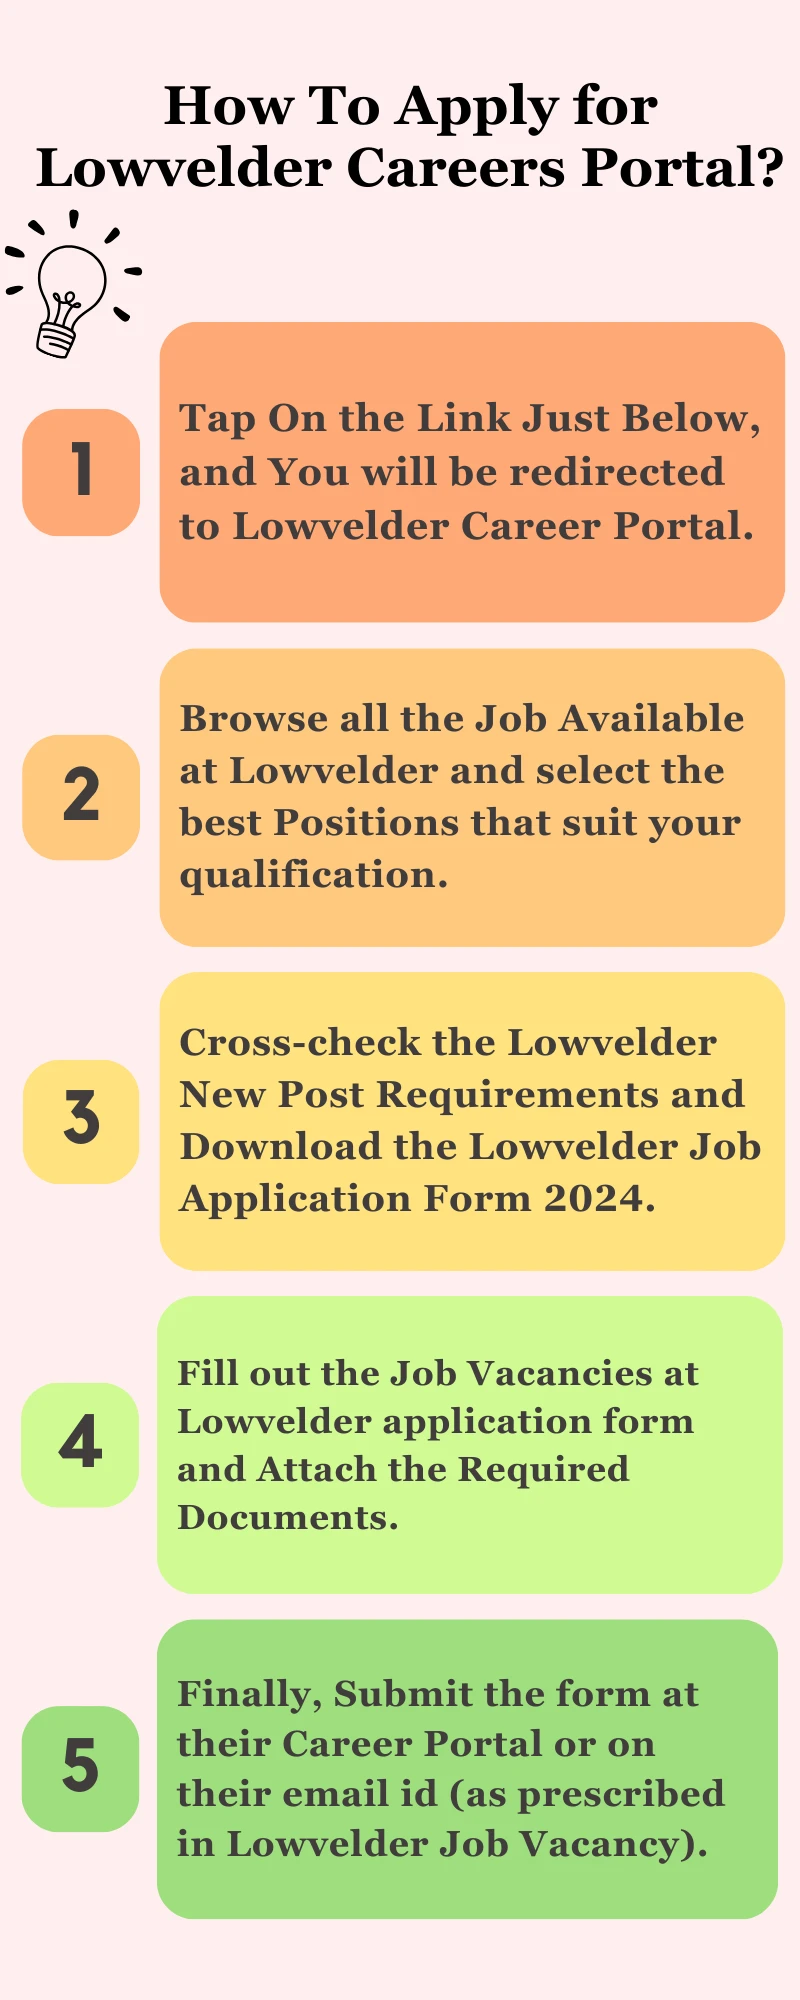 How To Apply for Lowvelder Careers Portal?